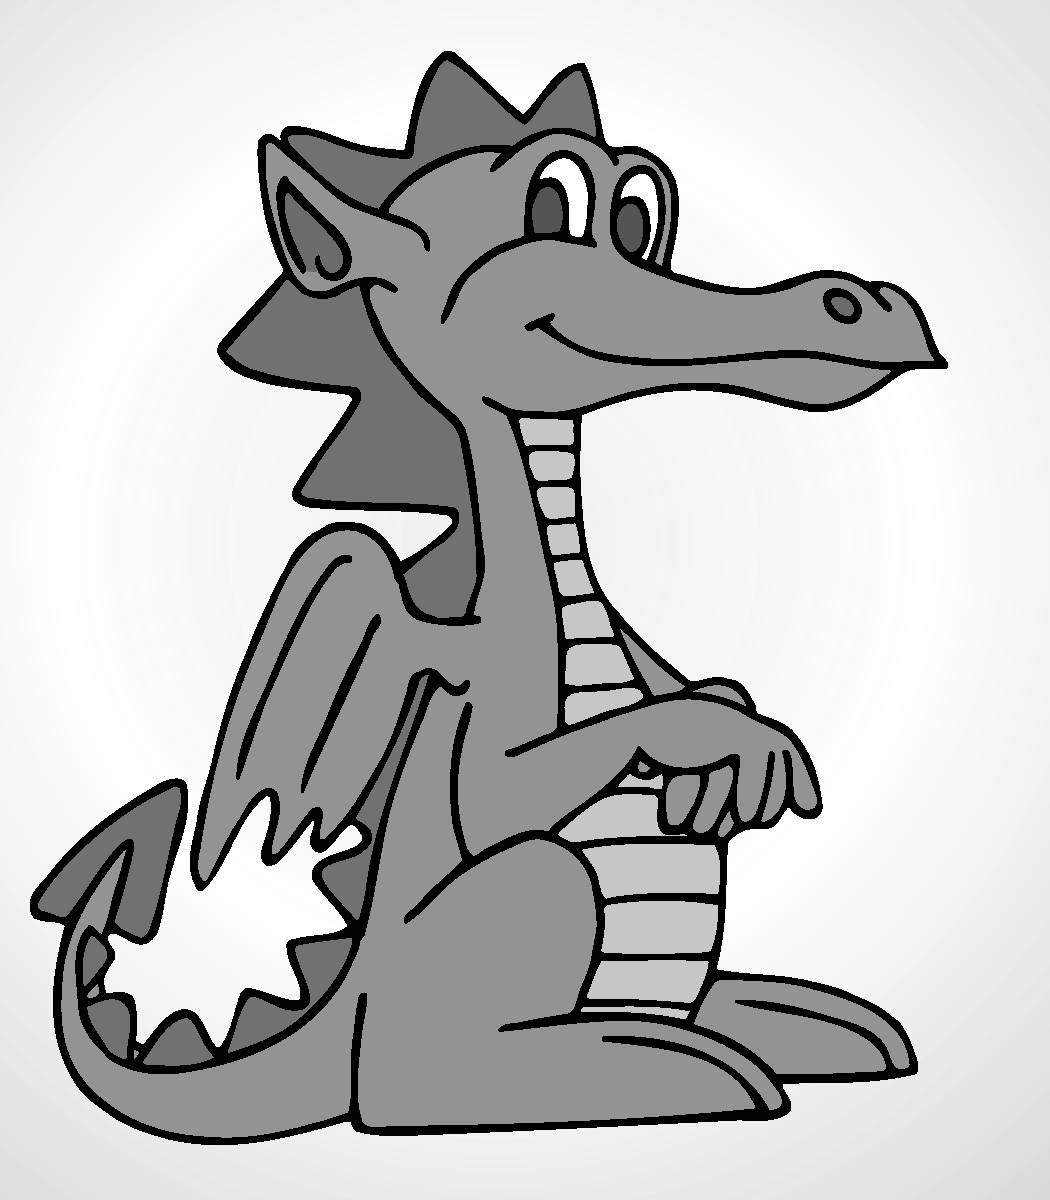 easy dragon drawings black and white